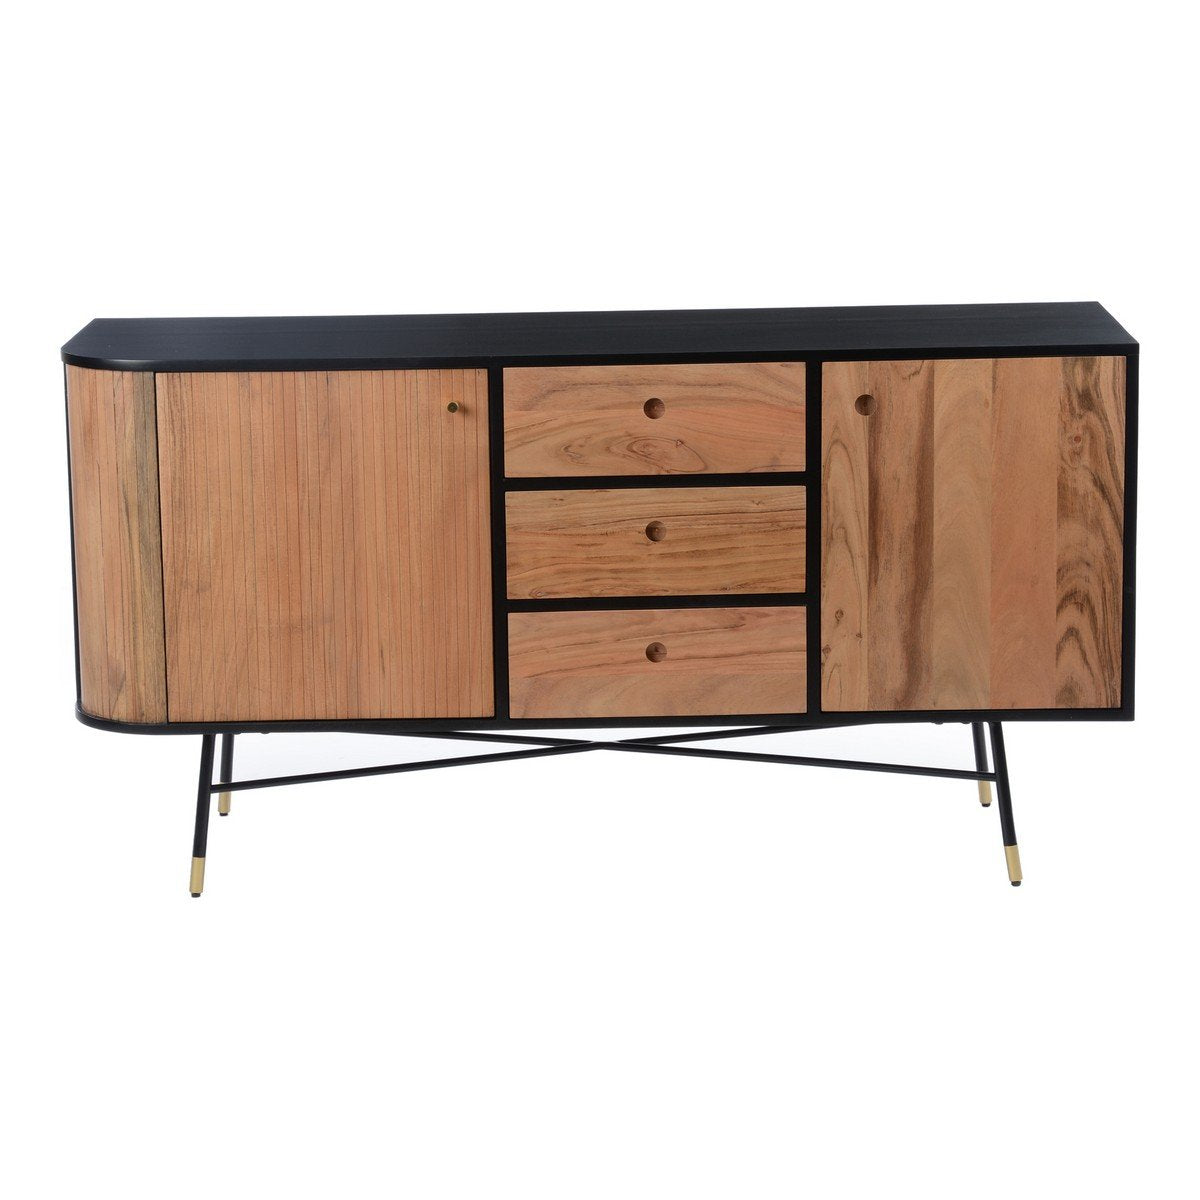 Moe's Home Collection Black And Tan Sideboard - BZ-1104-02 - Moe's Home Collection - Sideboards - Minimal And Modern - 1